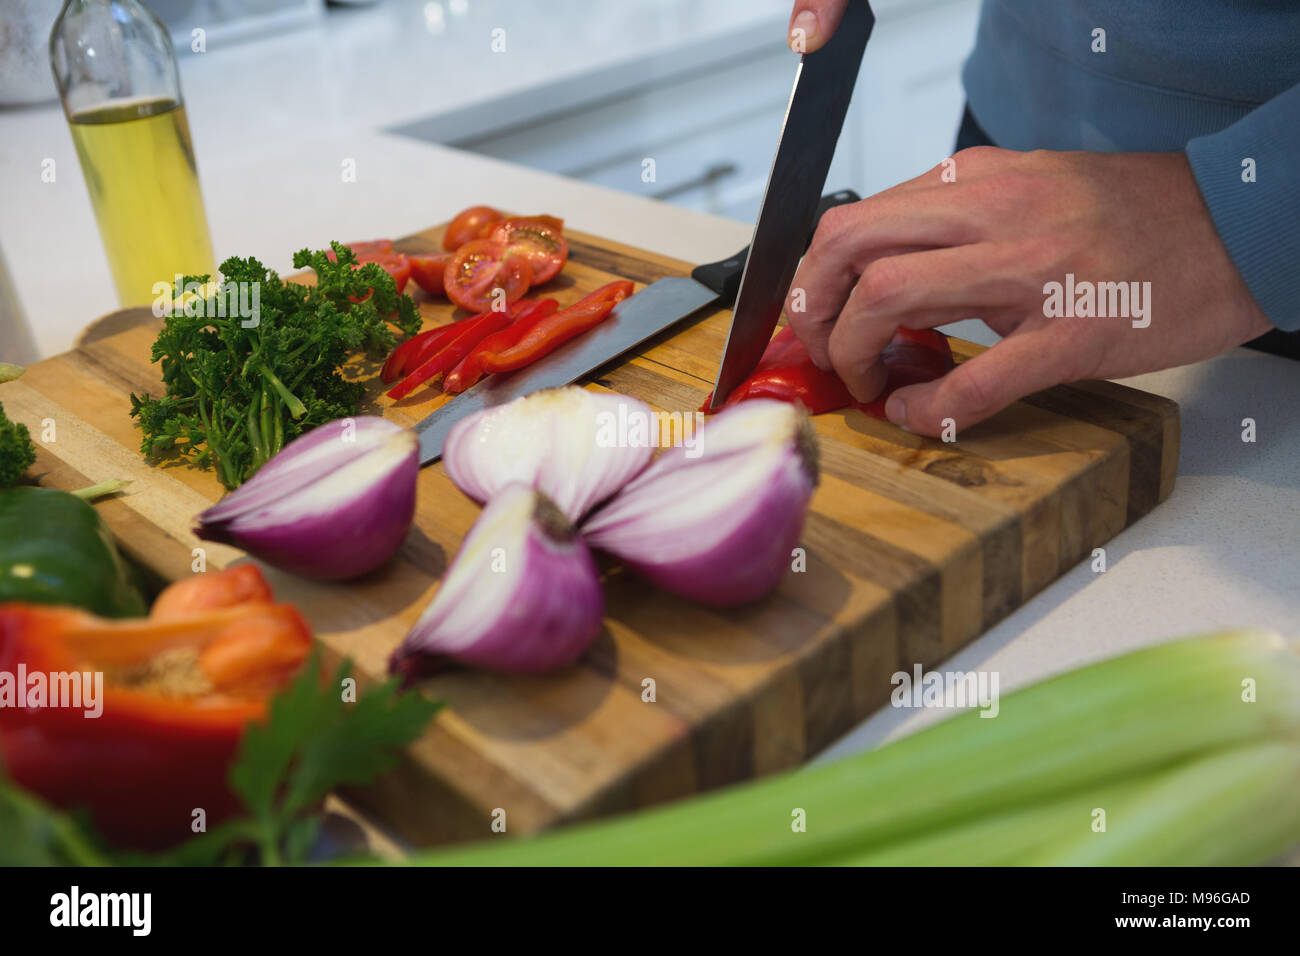 Man cutting vegetables in kitchen at home Stock Photo